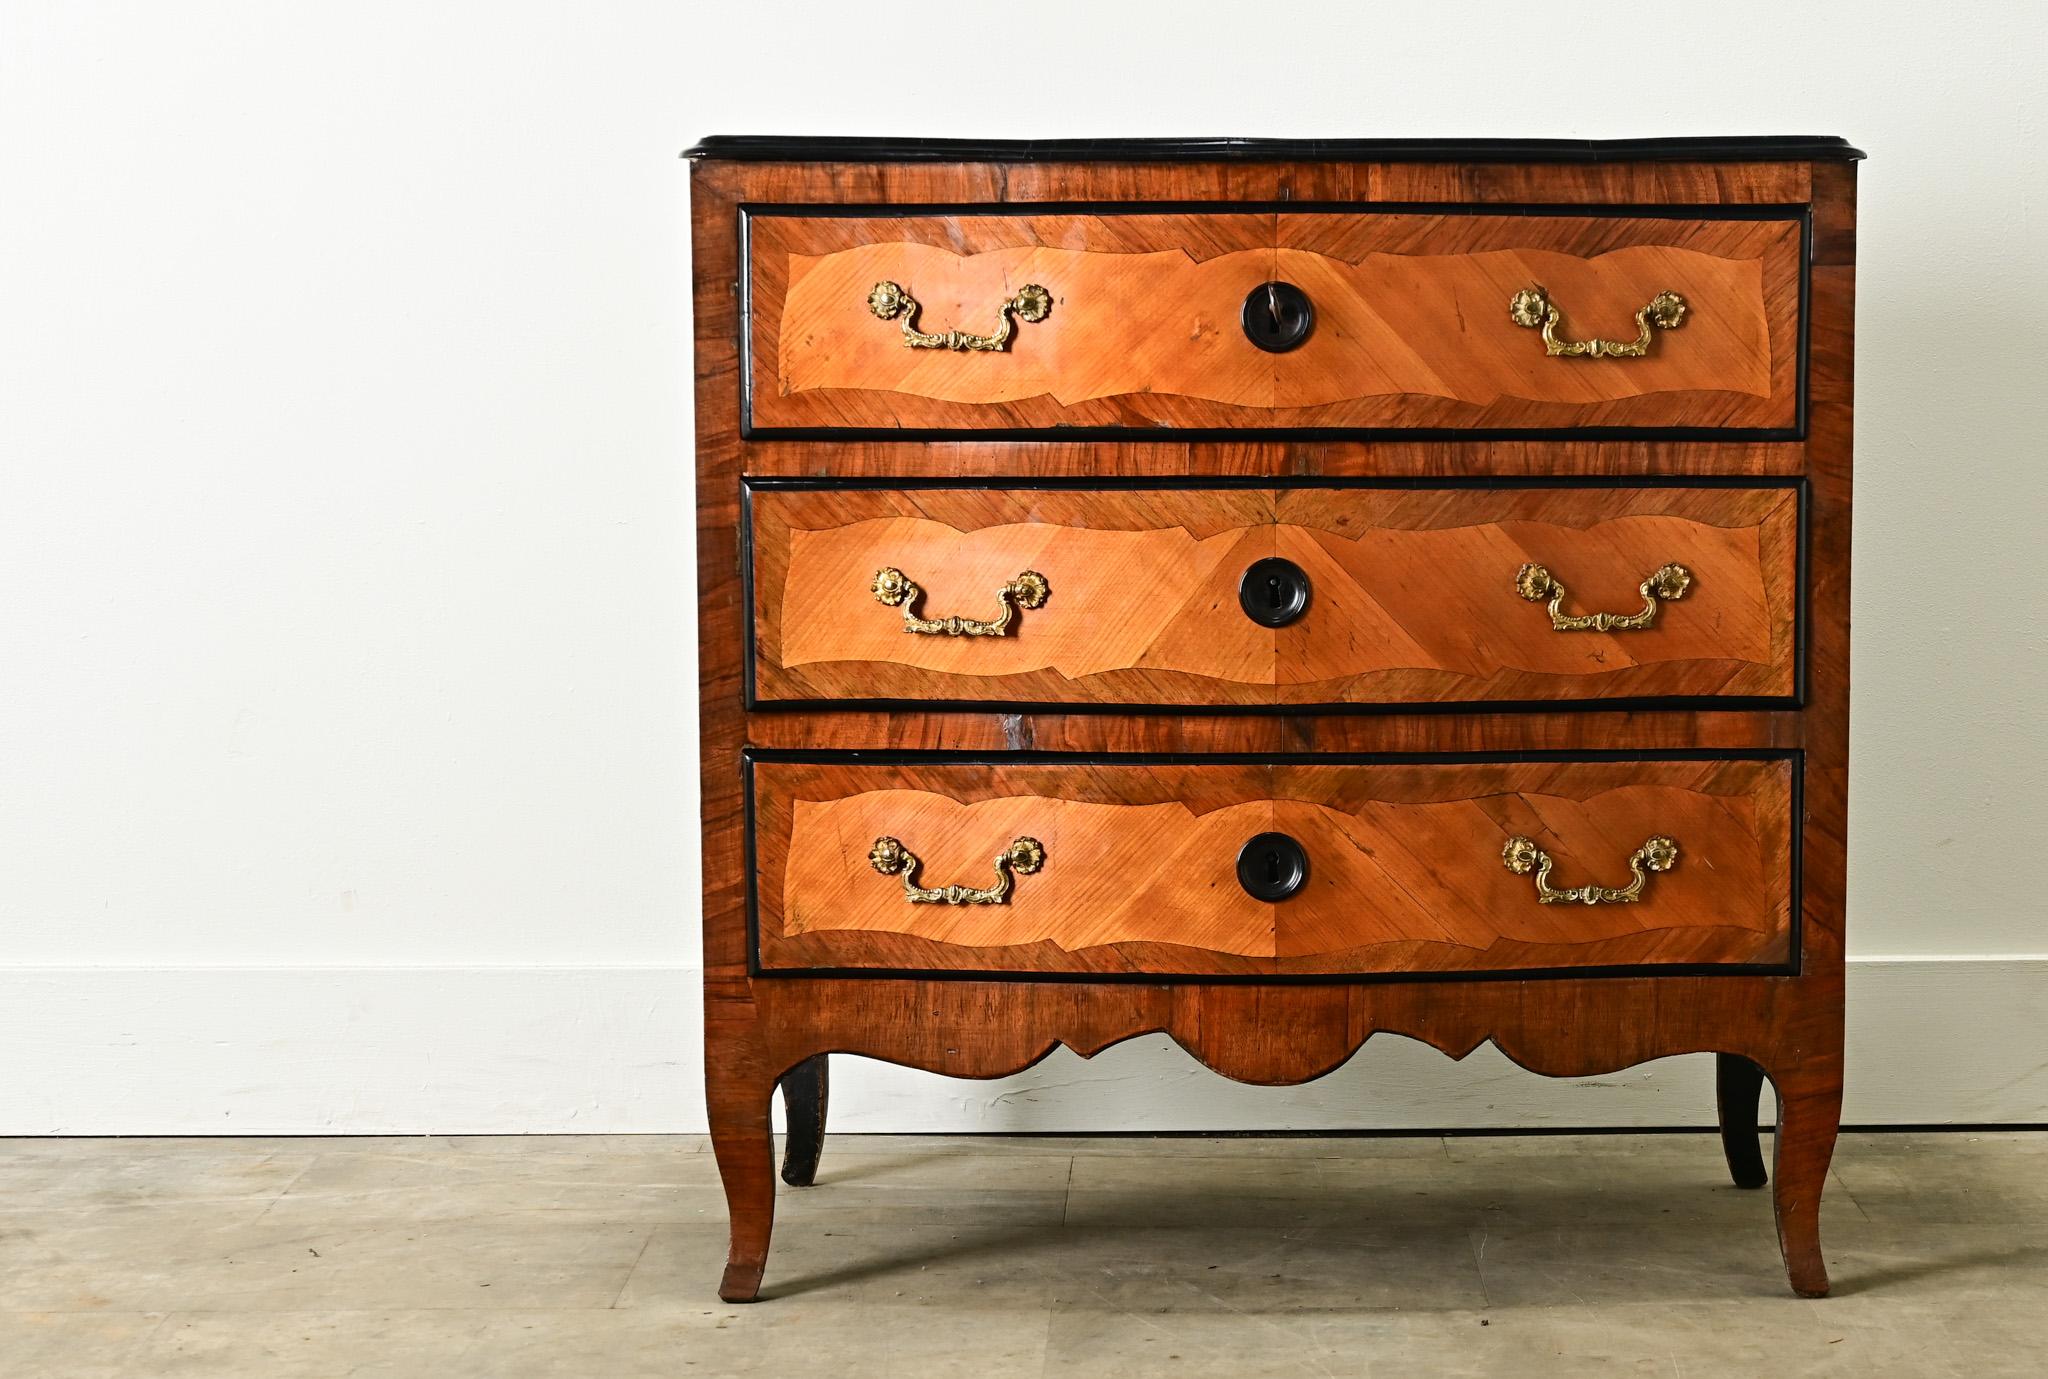 A petite and impressive French marquetry commode from the 1700’s. The commodes top is in wonderful antique condition with marquetry designs trimmed with ebonized molding. There are three drawers all with patterned marquetry designs, gilt bronze